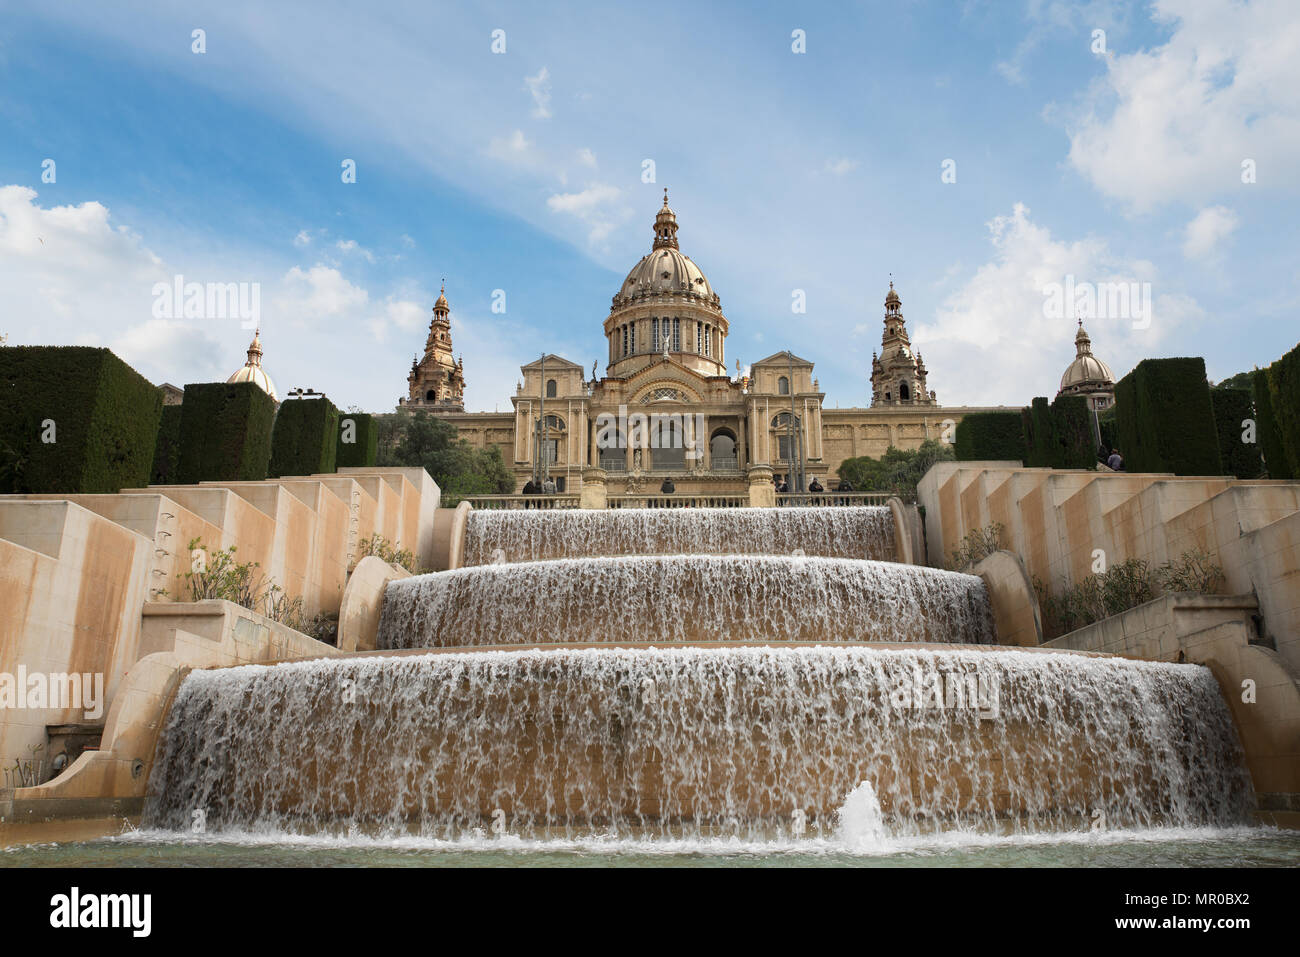 Barcelona Placa De Espanya, the National Museum with magic fountain in afternoon at Barcelona. Spain. Famous landmark in Spain. Stock Photo